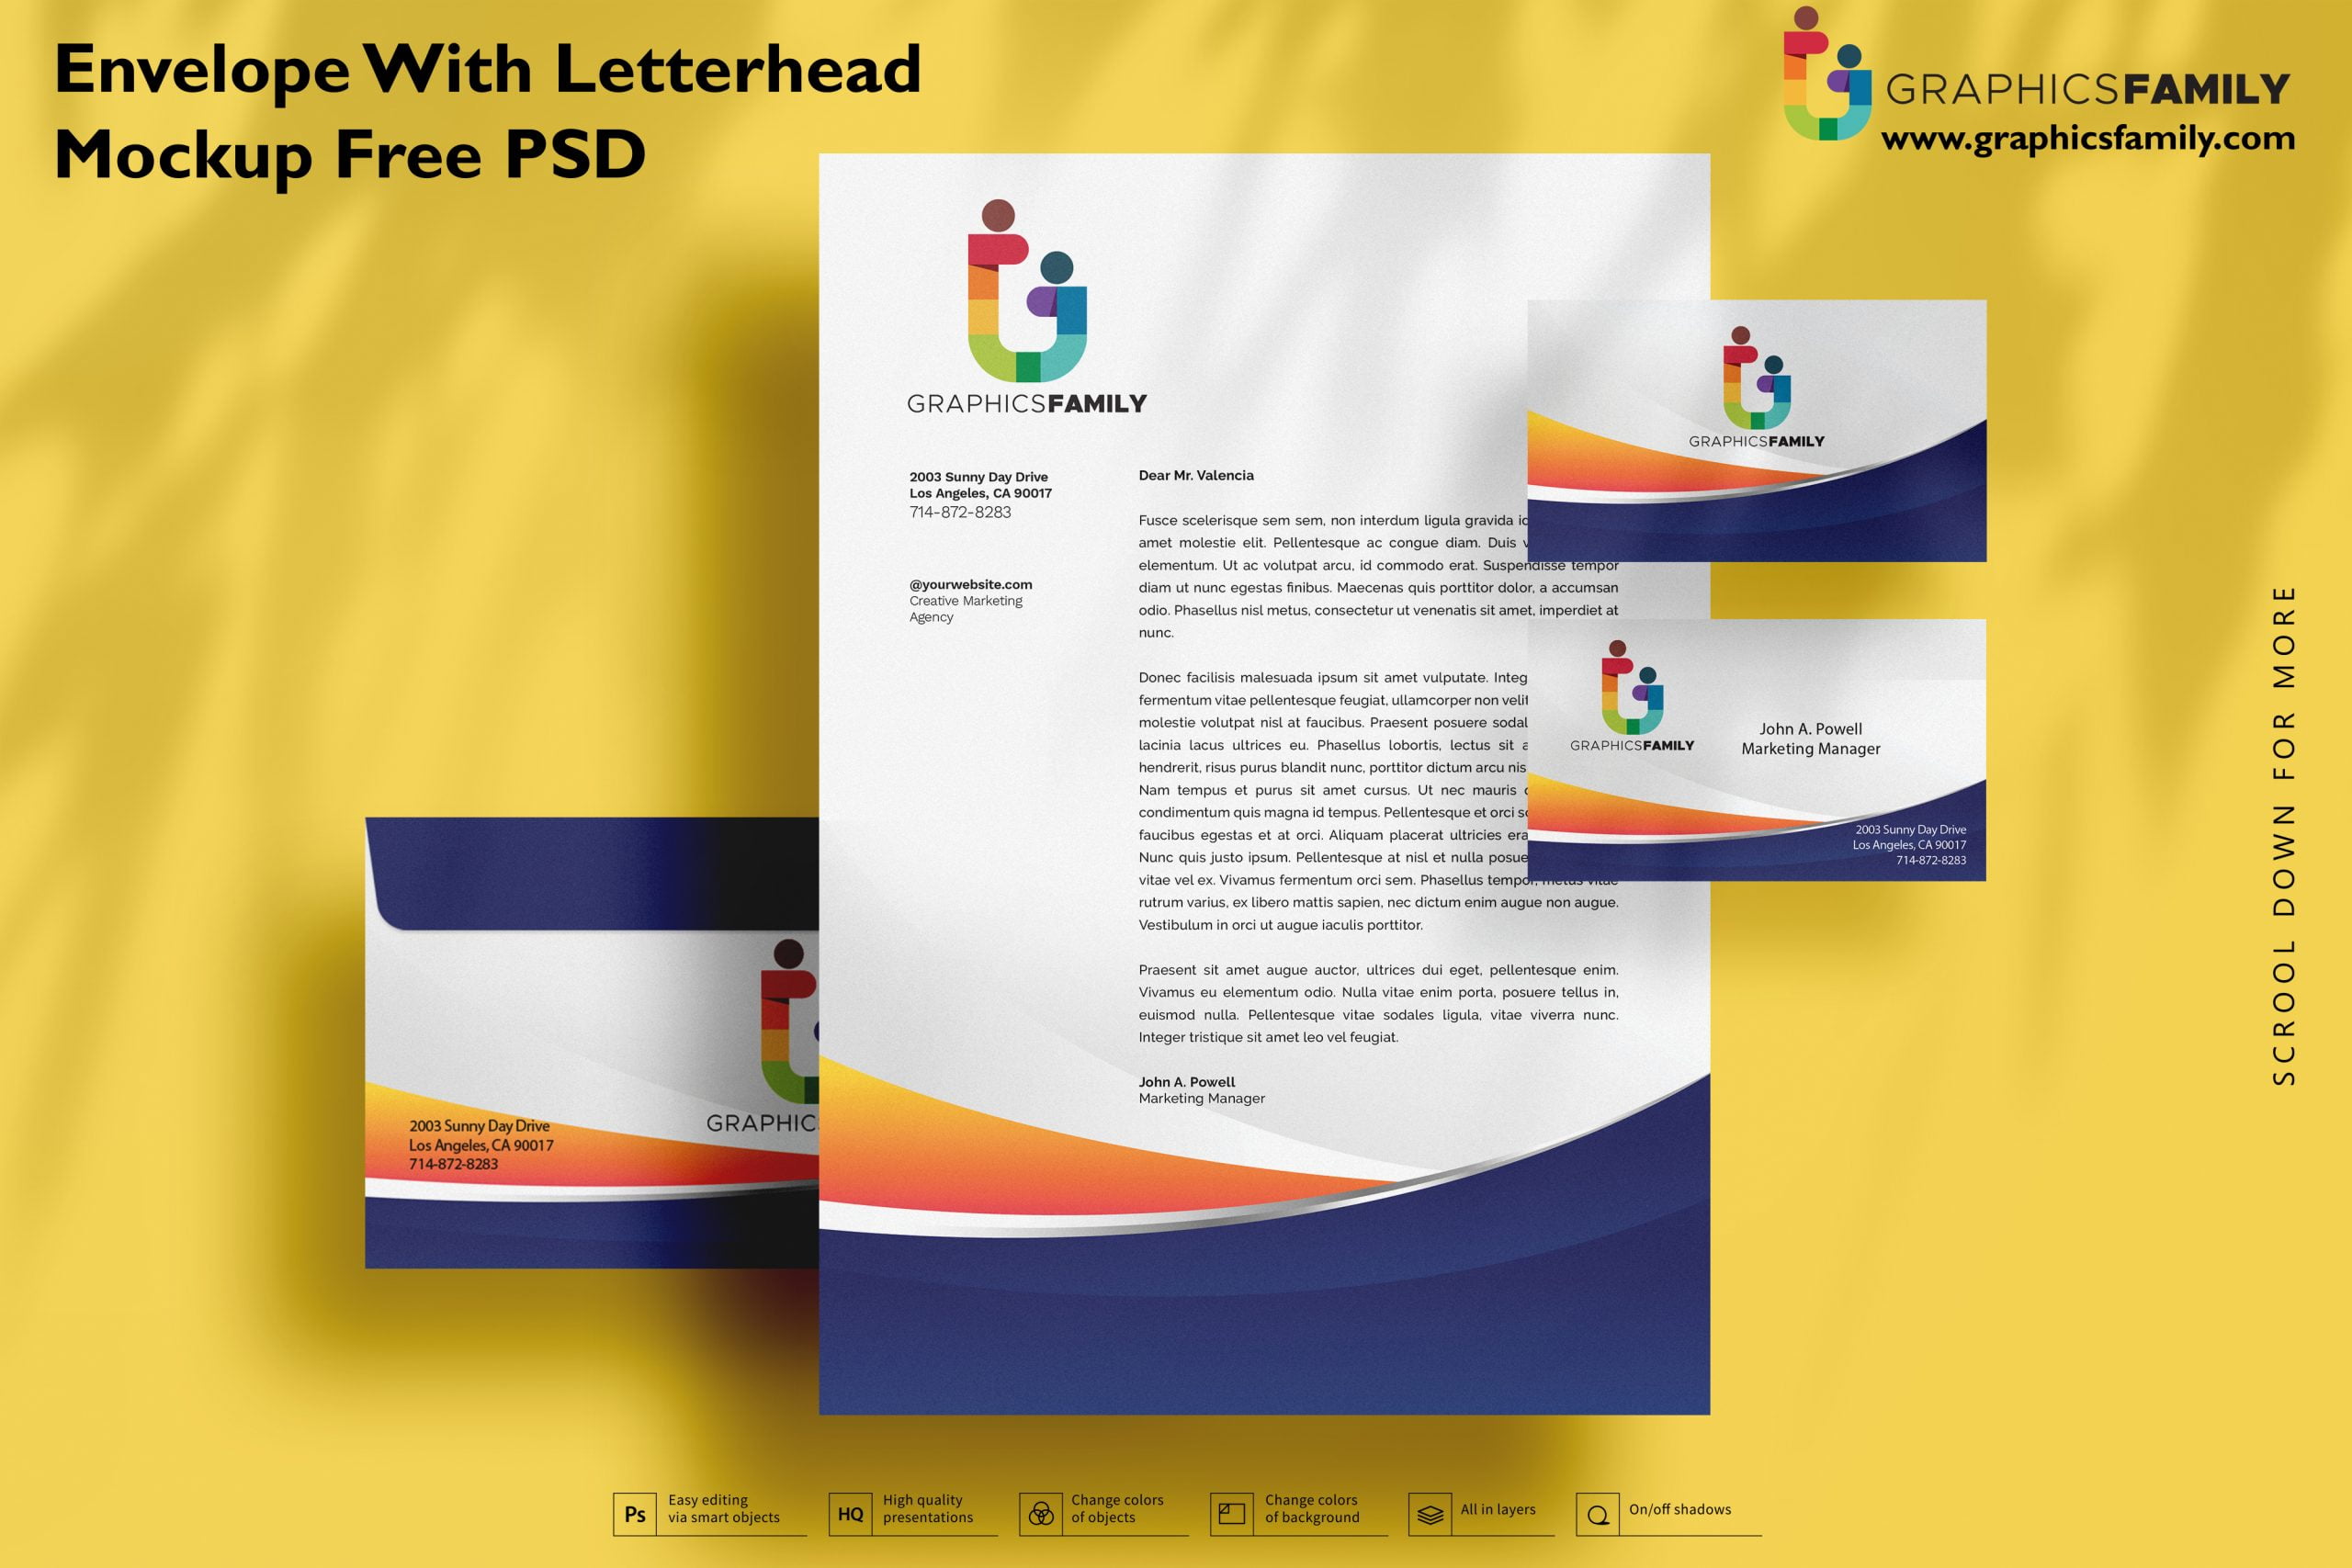 Download Envelope With Letterhead Mockup Free Psd Graphicsfamily